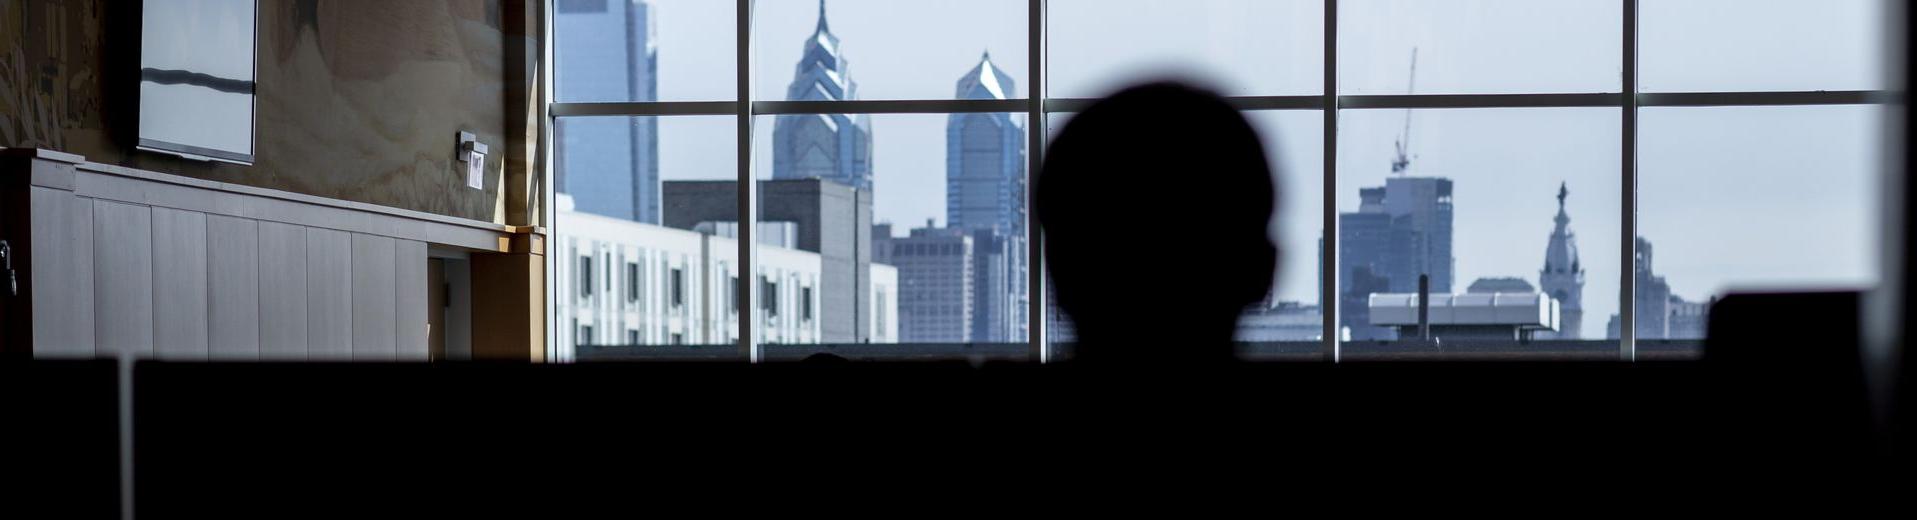 A student looks at the Philadelphia skyline through the windows of a building at 威尼斯赌场网站.